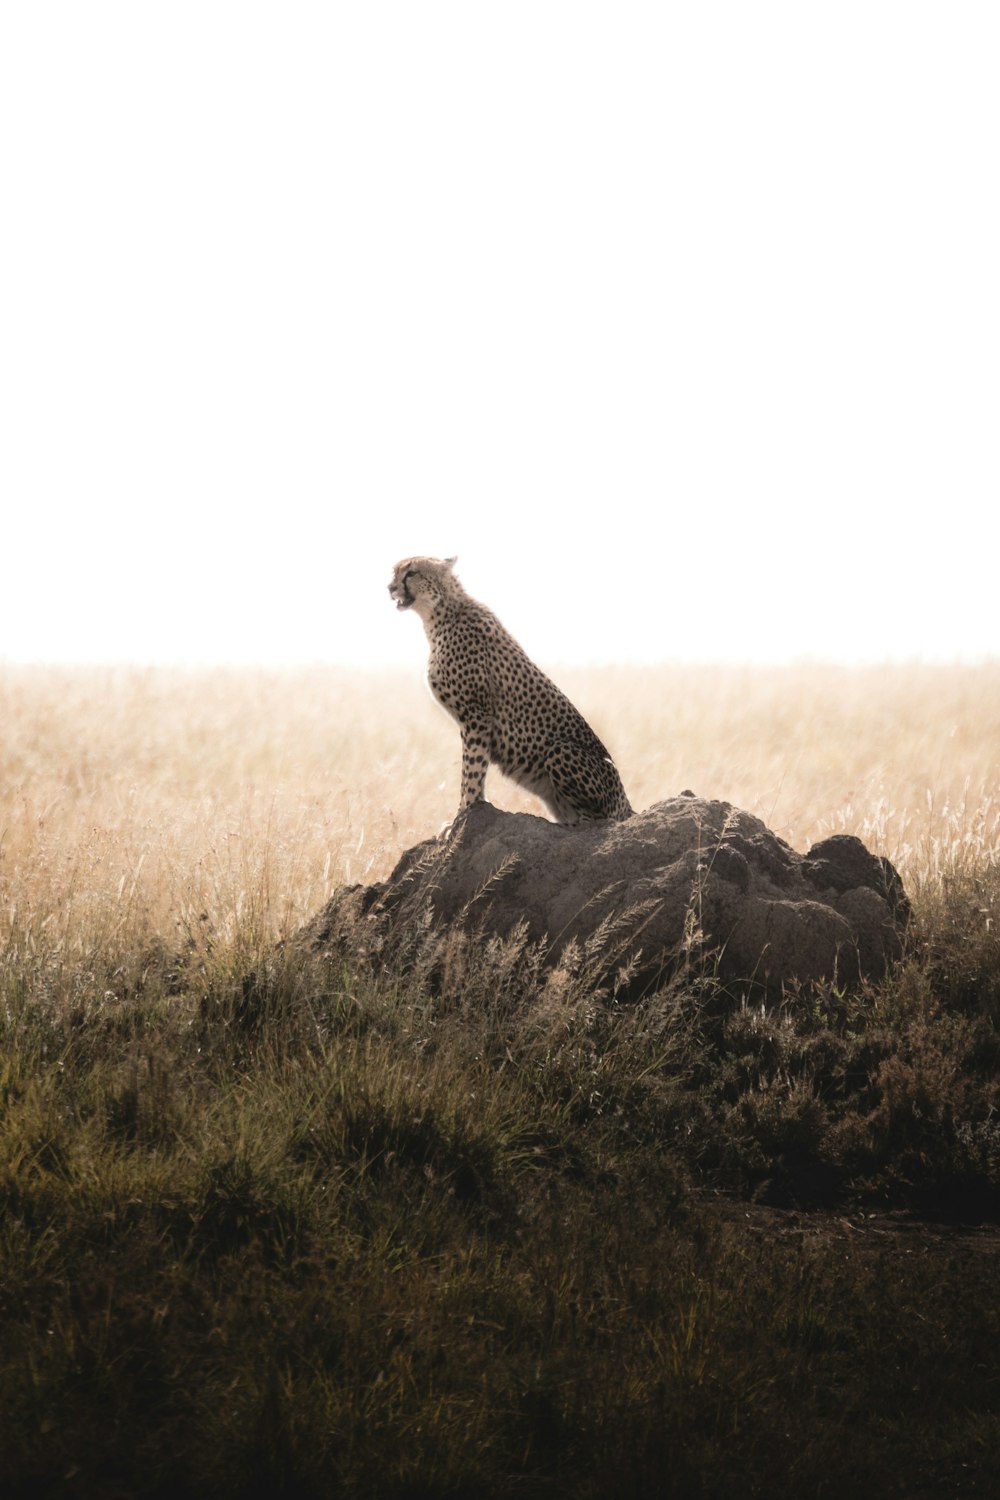 a cheetah standing on a rock in a field